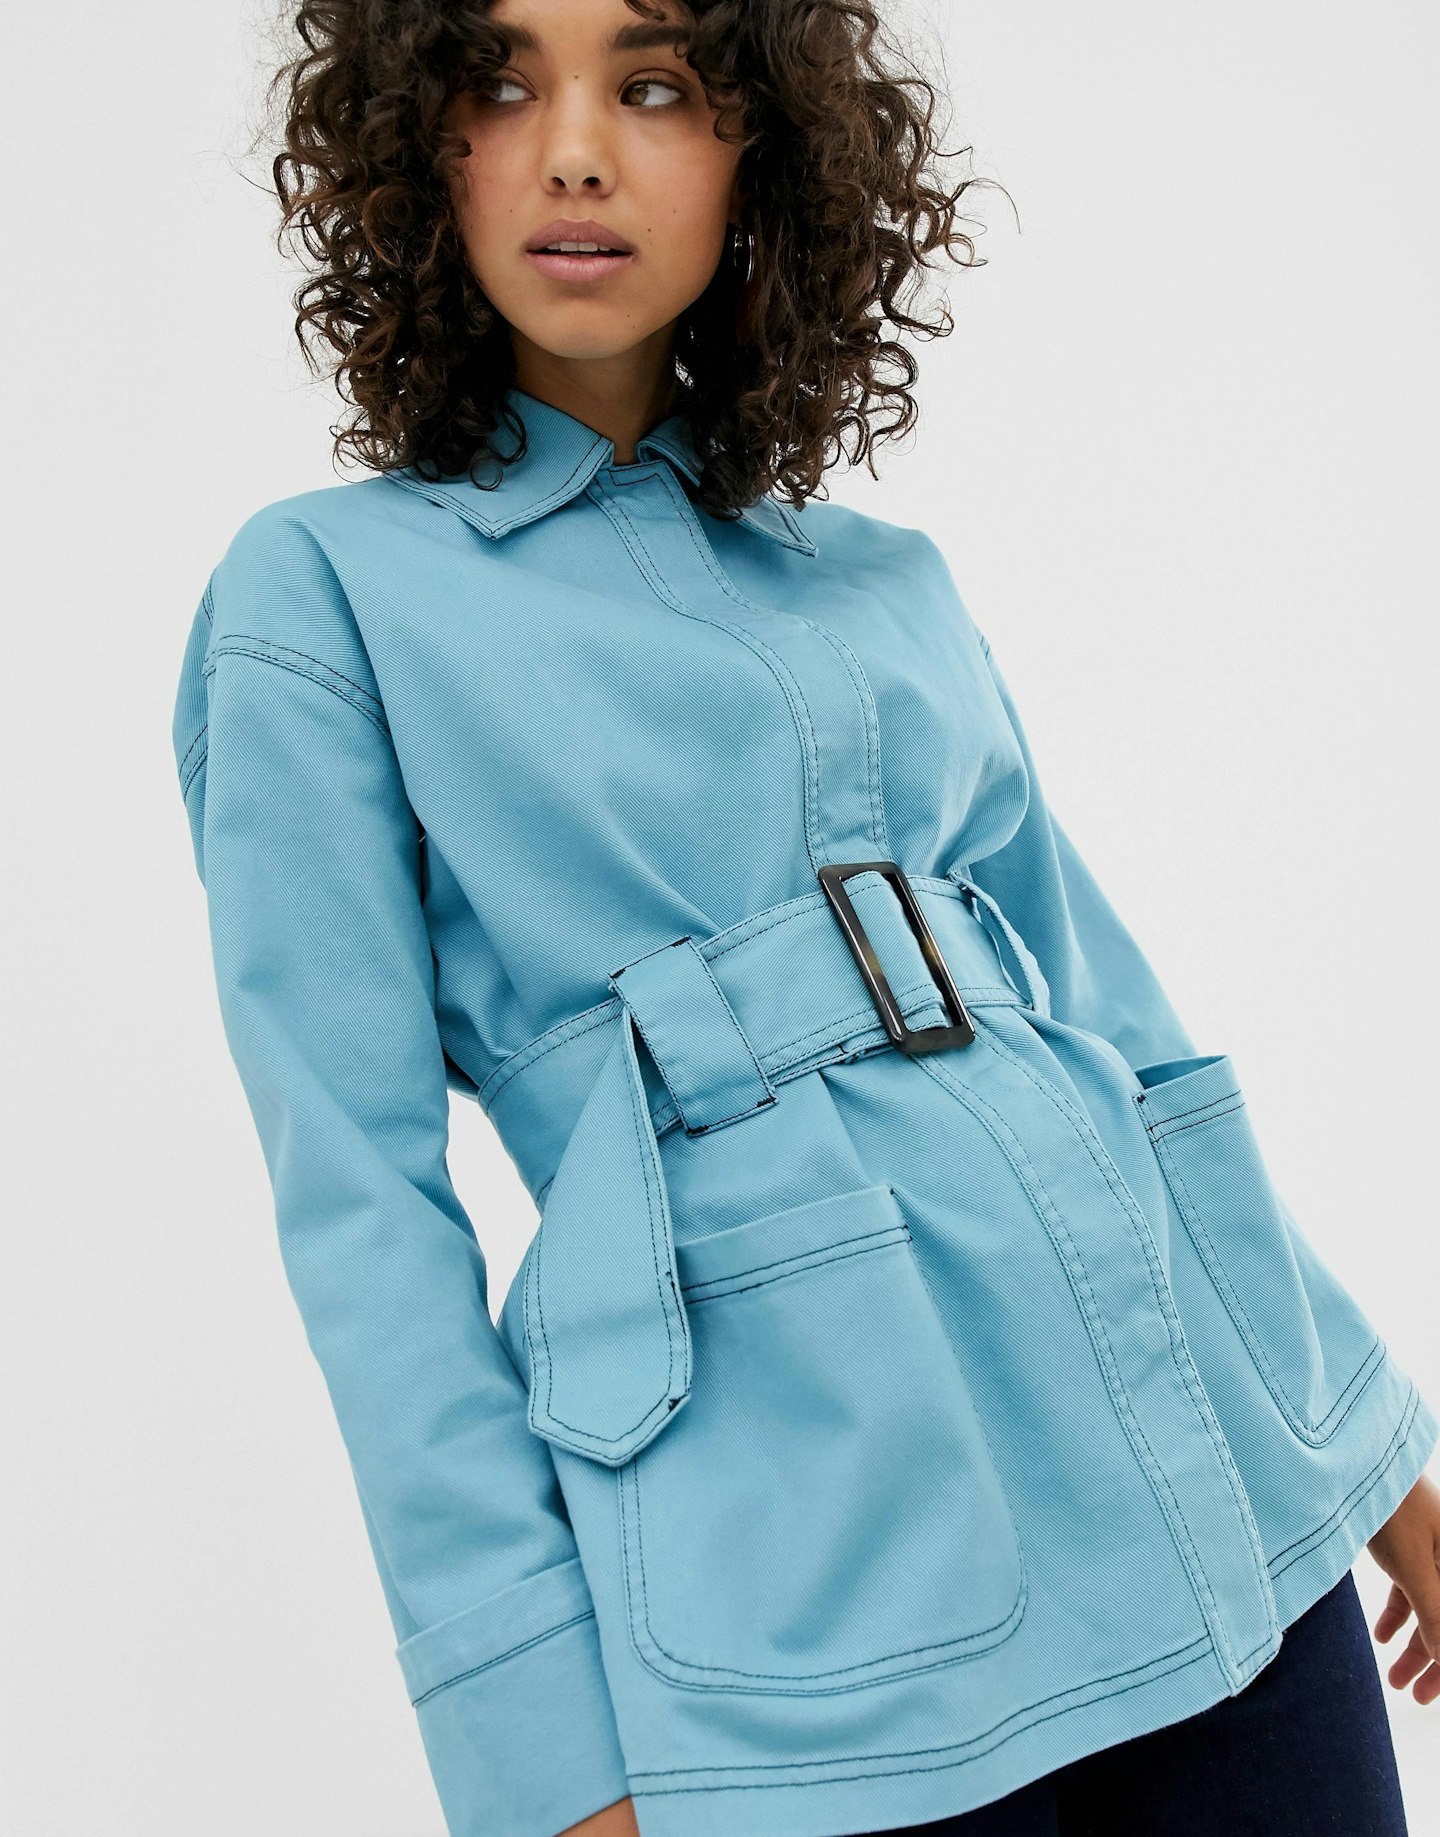 ASOS, Belted Jacket With Contrast Stitching, £45